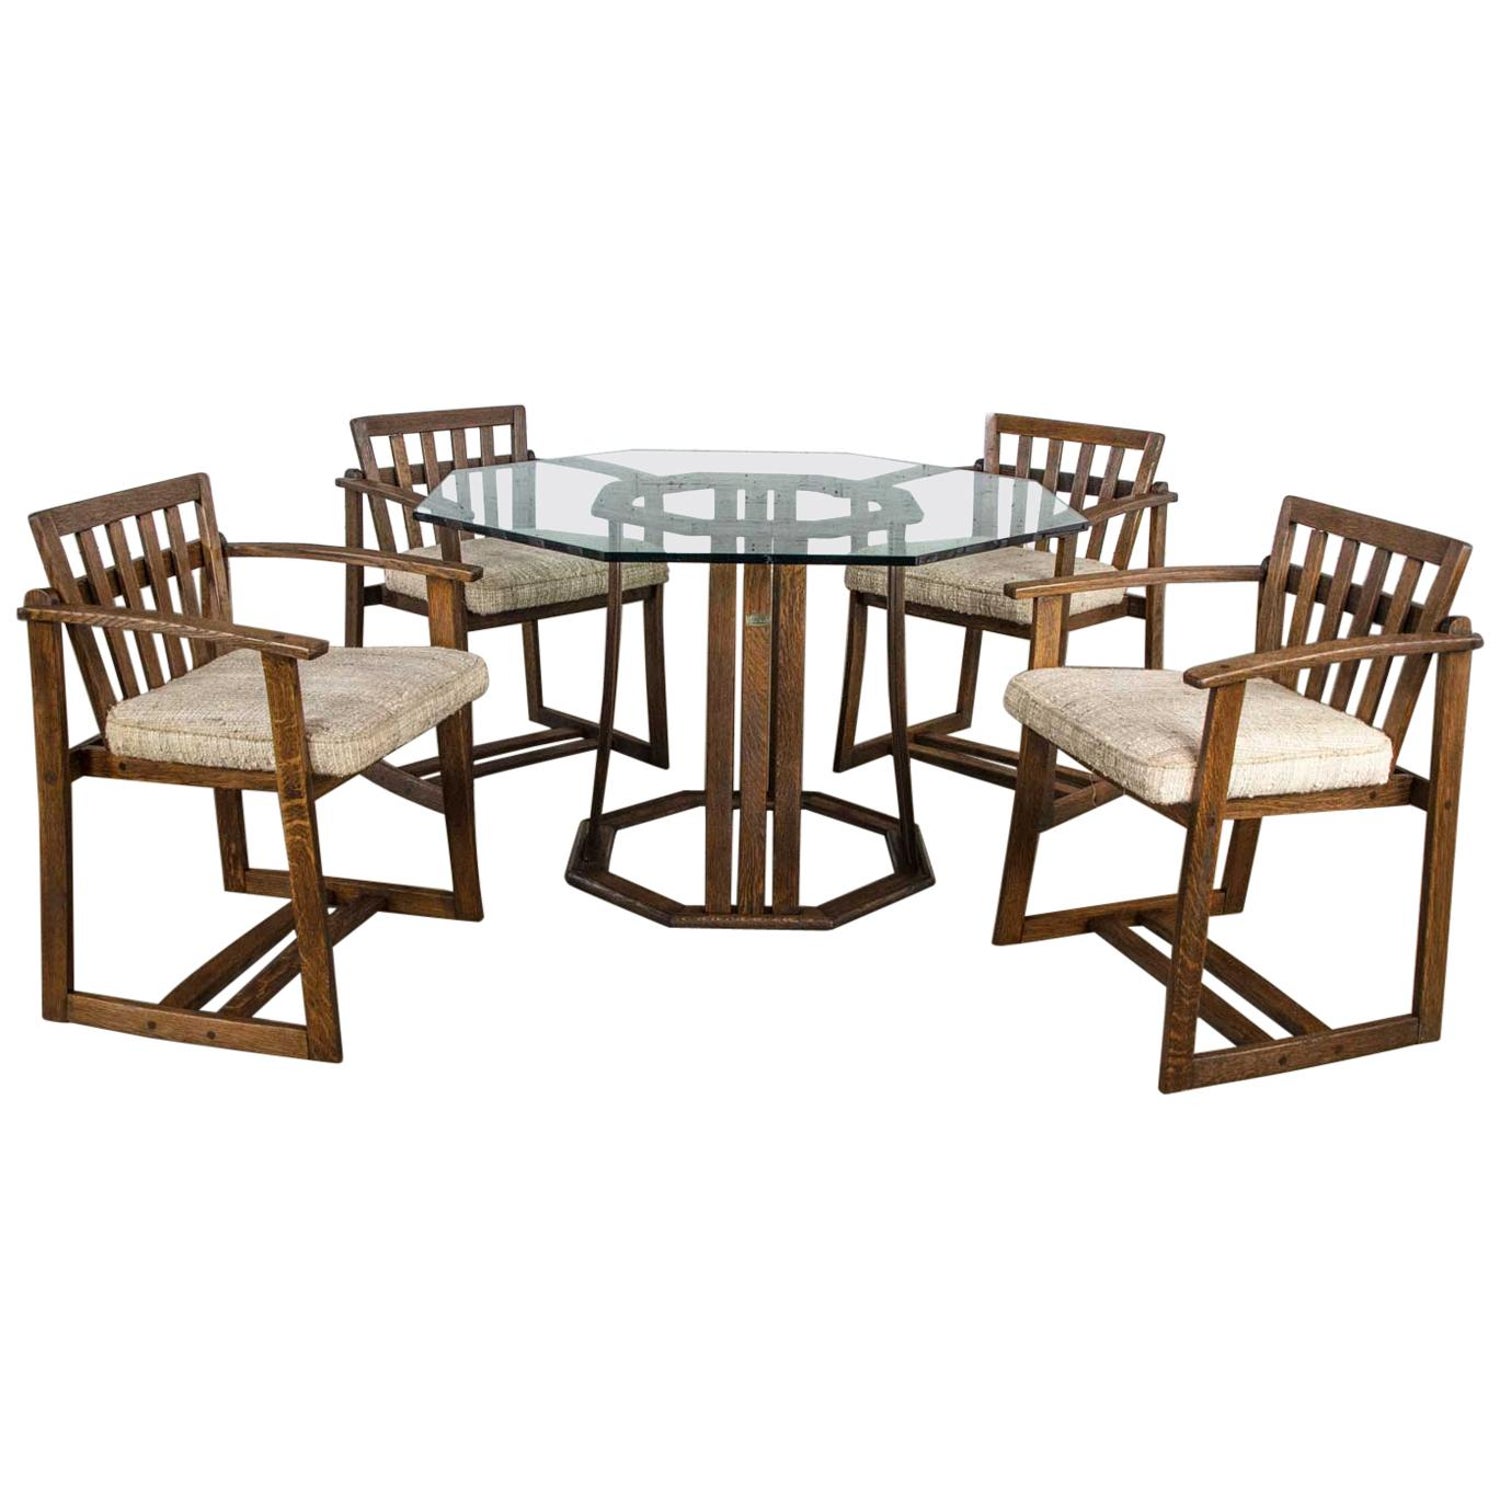 StavOak Dining Game Table and 4 Chairs Jack Daniels' Barrel Staves Jobie G  Redmond For Sale at 1stDibs